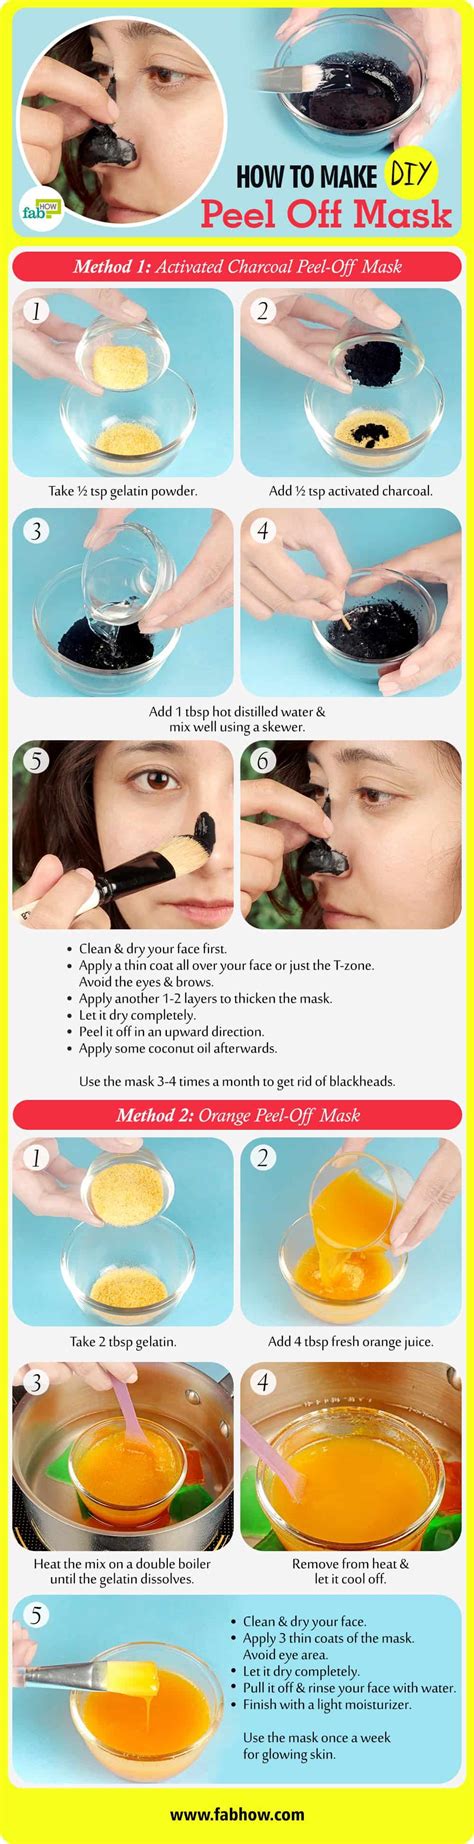 5 Diy Peel Off Facial Masks To Deep Clean Pores And Blackheads Fab How